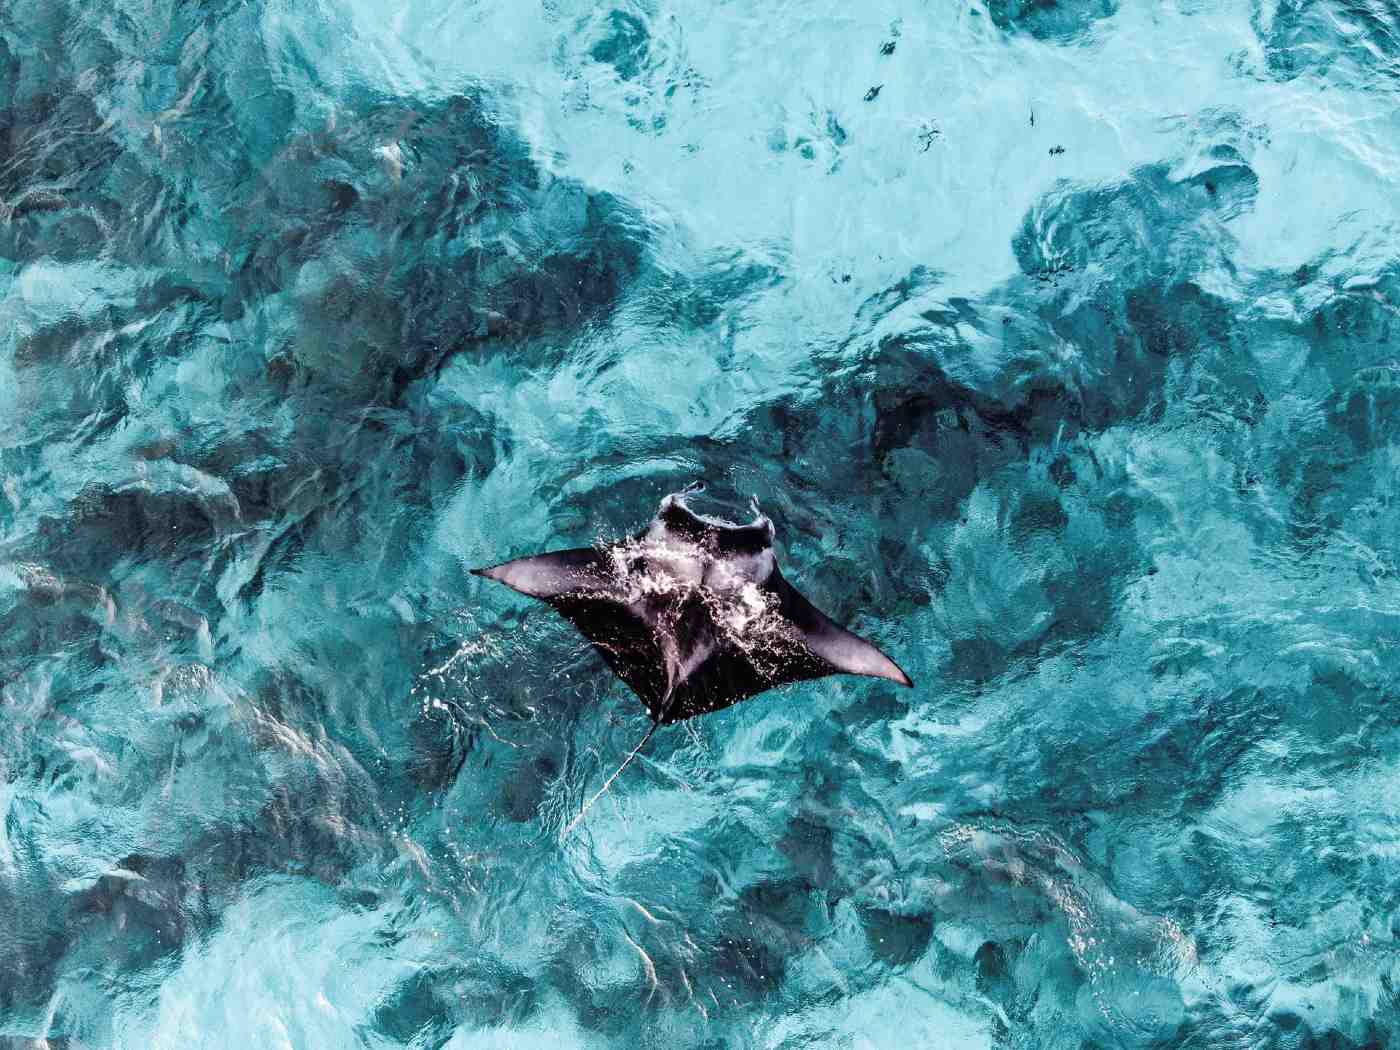 Scientists Find Only The Third Manta Ray Nursery in the World, “Right Under Our Nose” Off Florida Coast